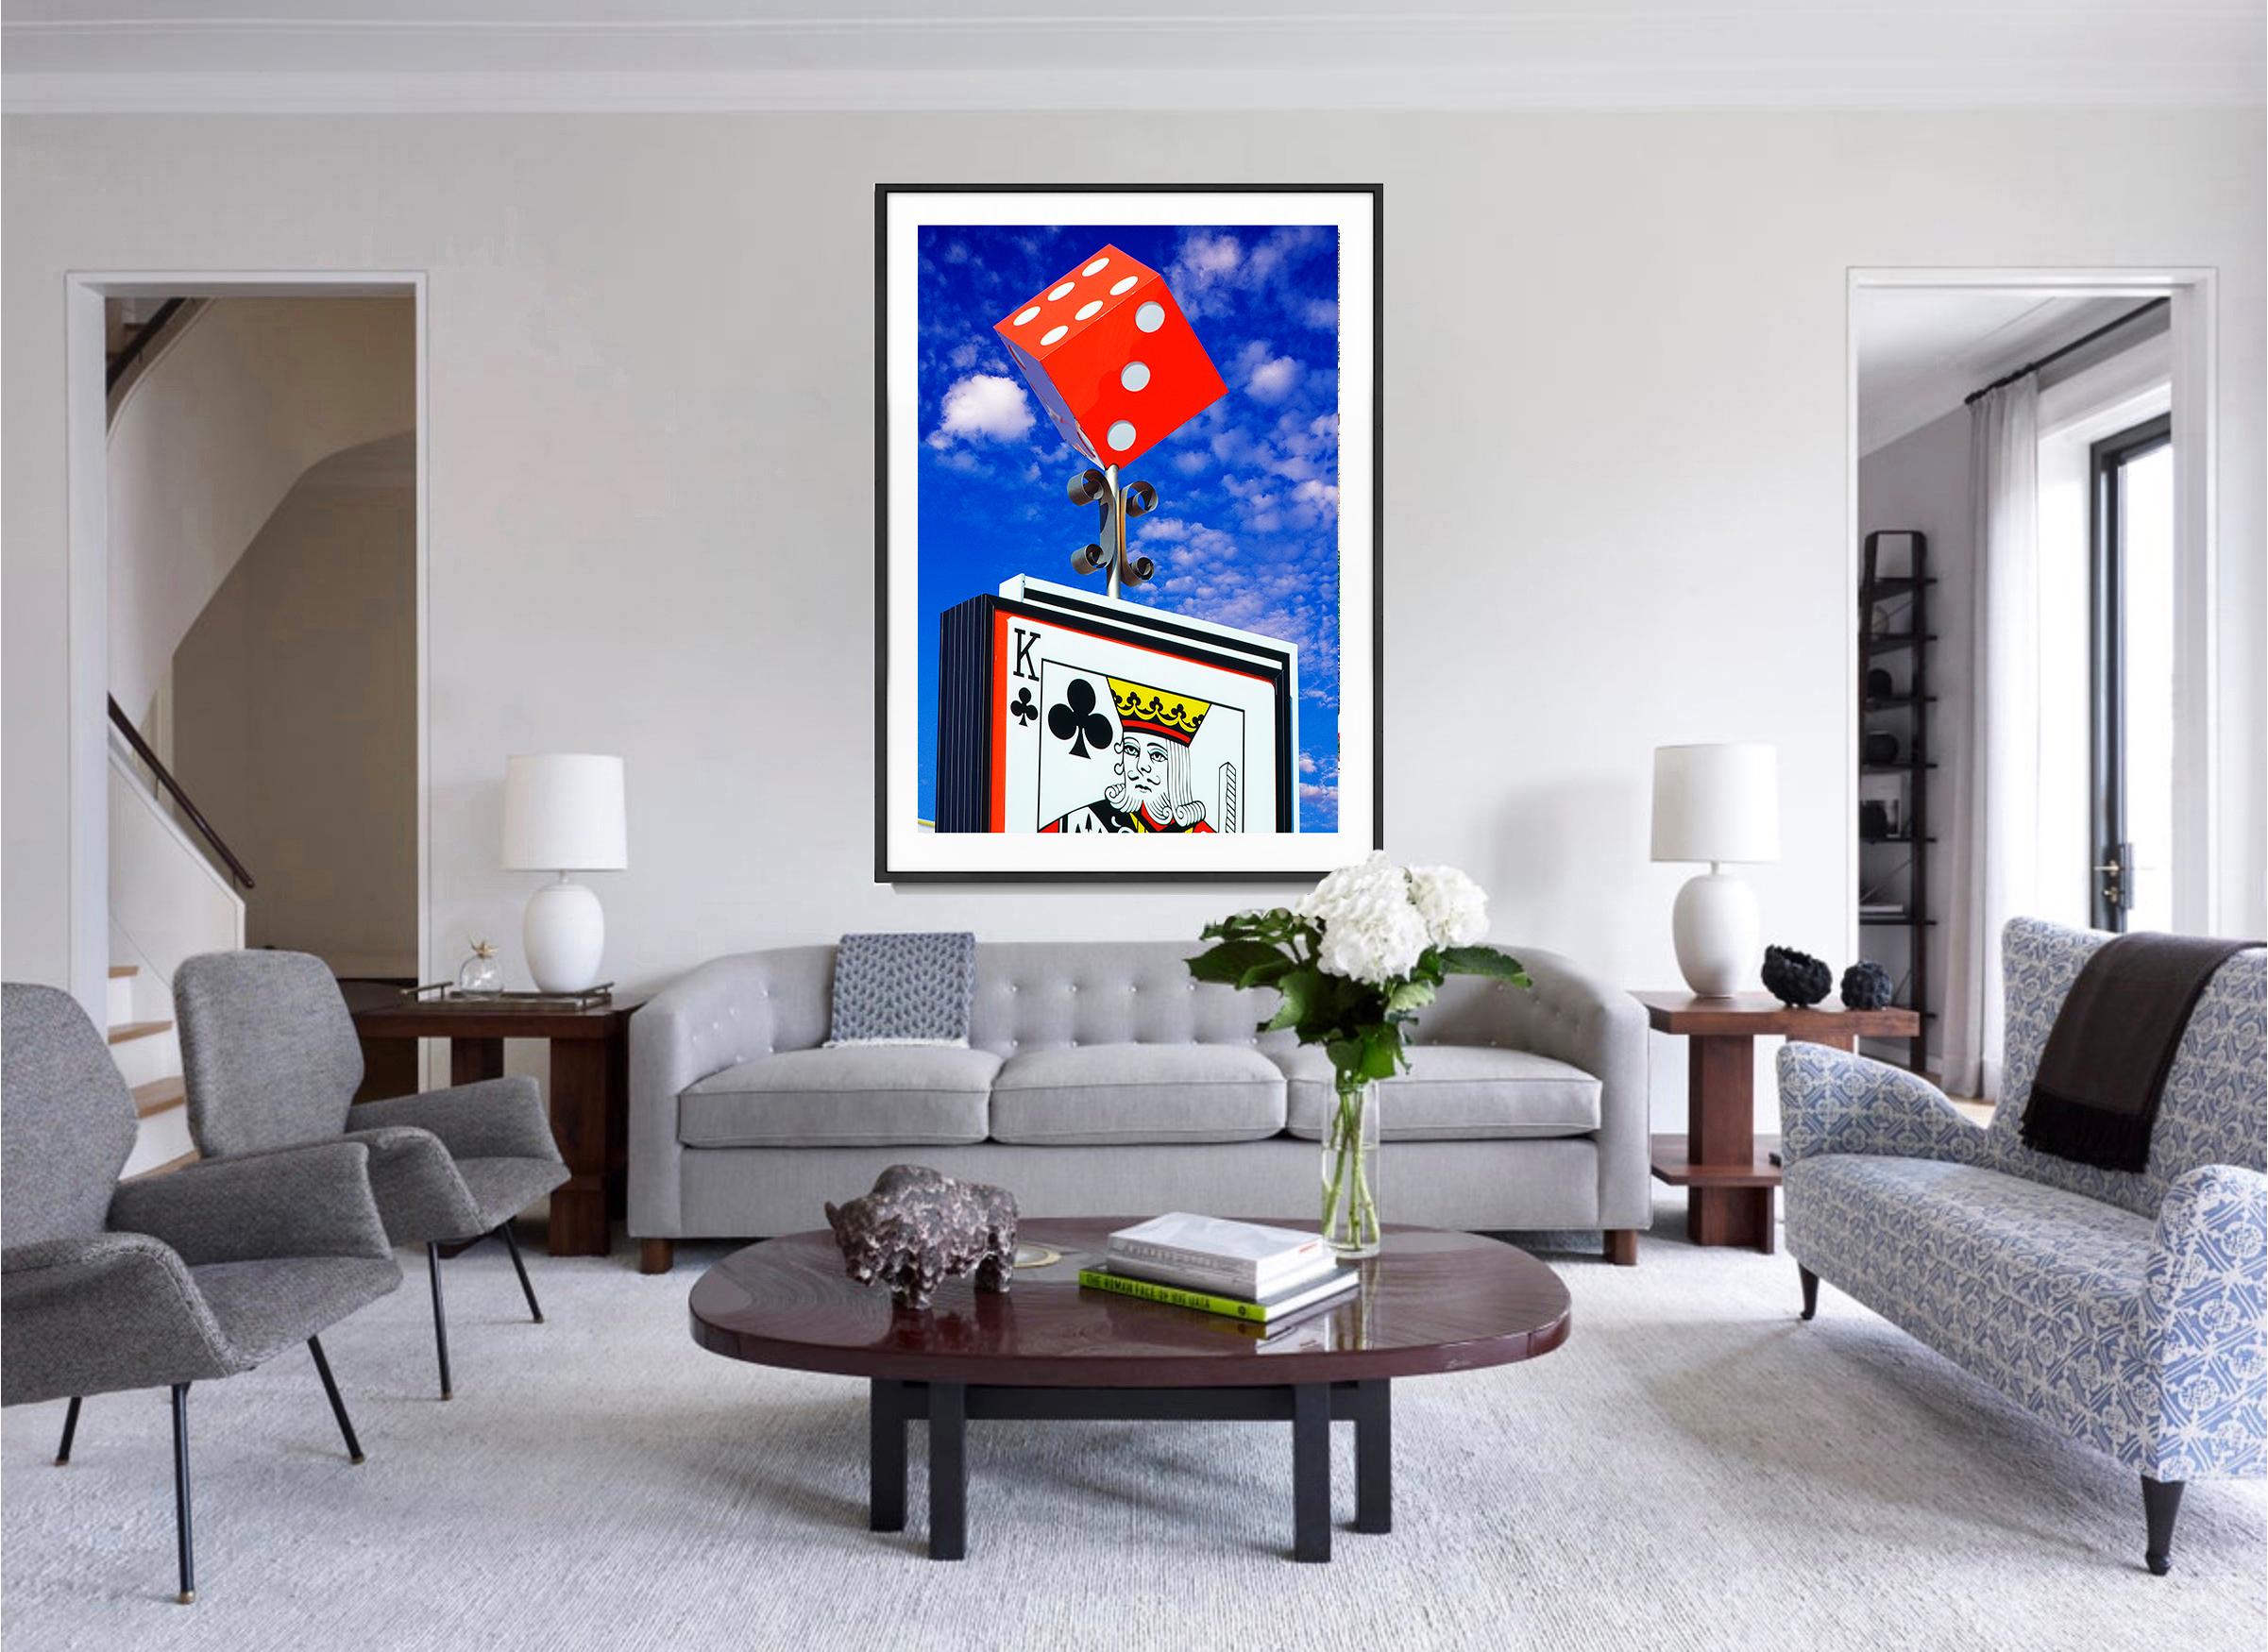 Las Vegas Gambling Dice  - Primary Colors  - Abstract Geometric Photograph by Mitchell Funk